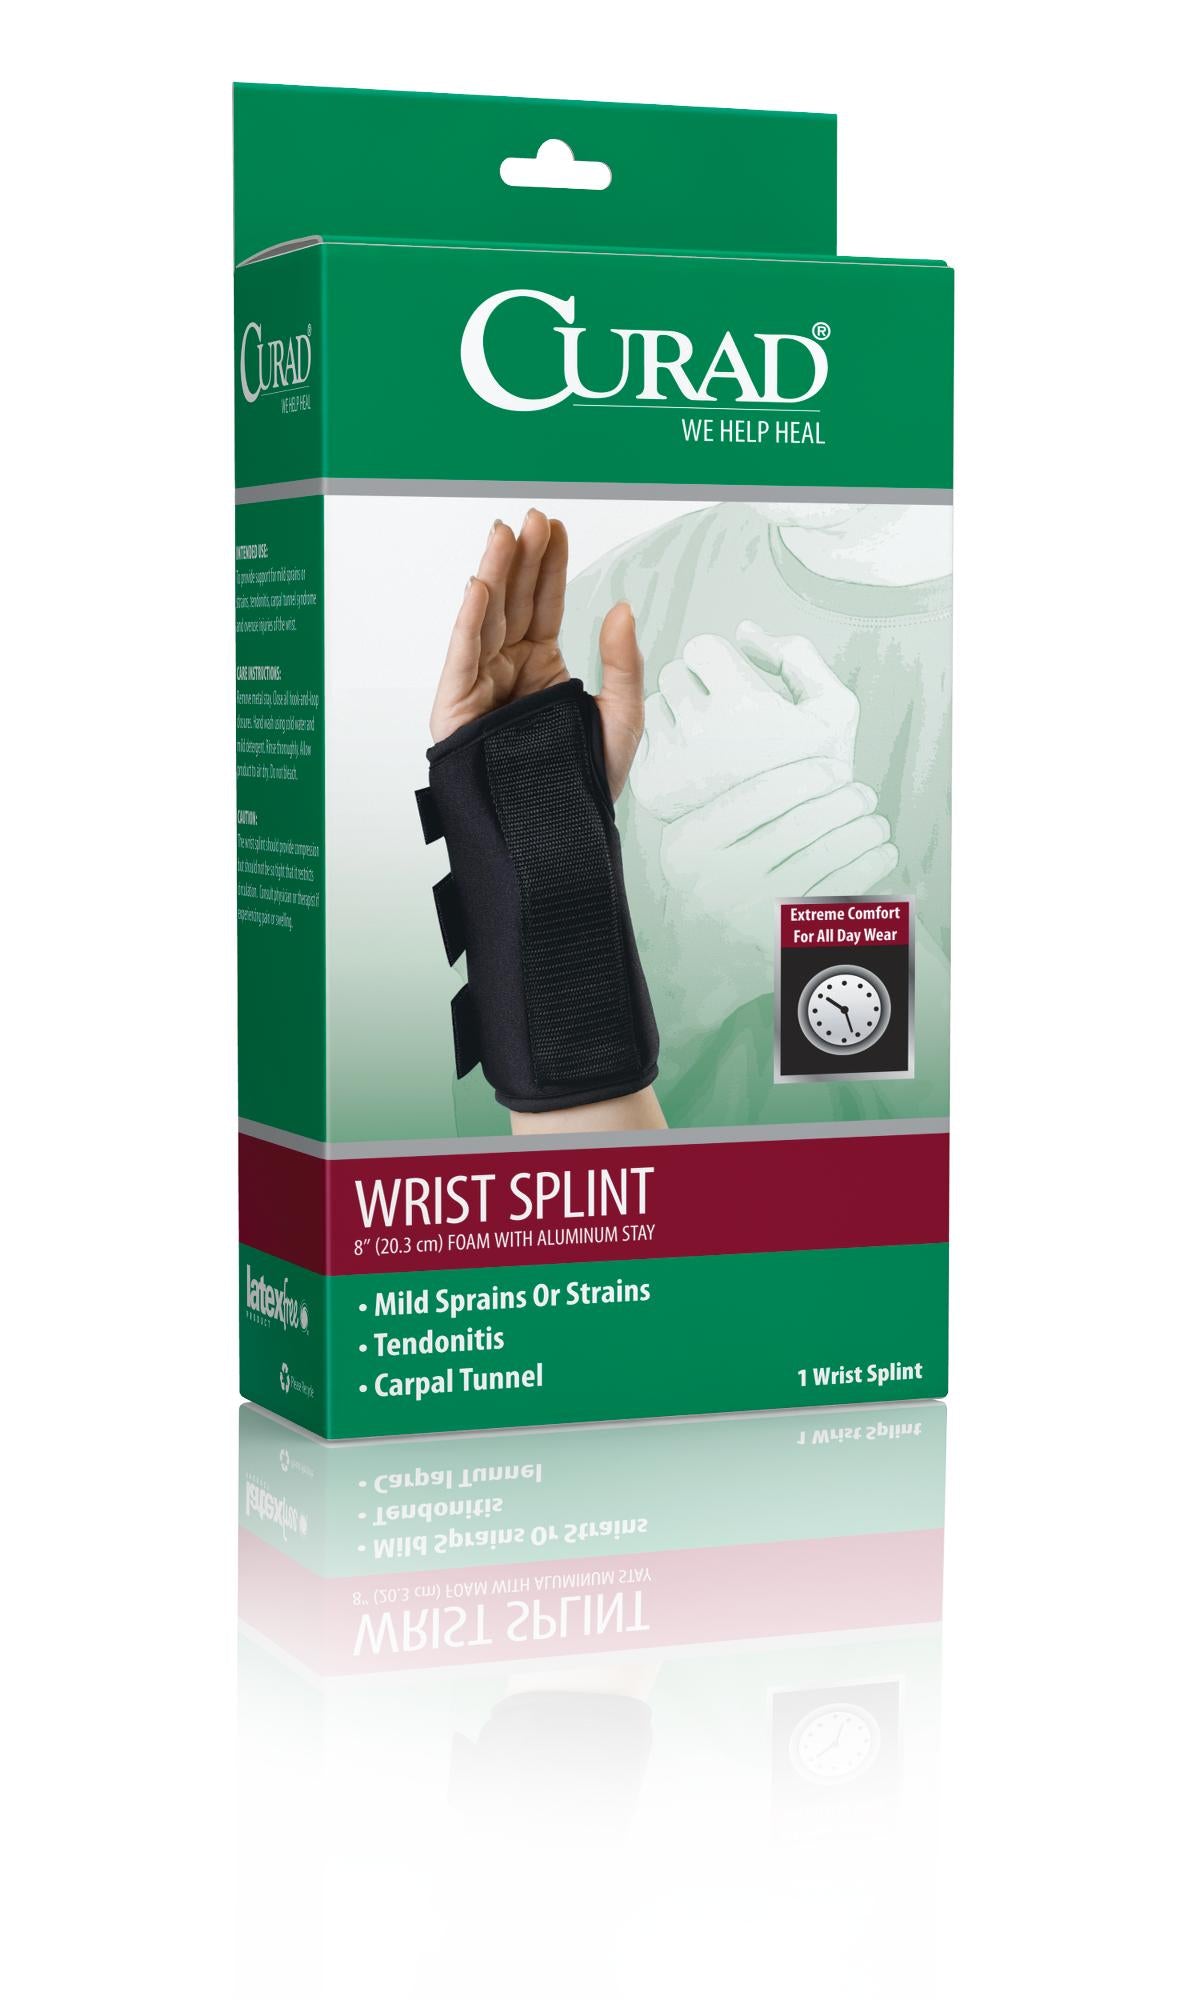 Physical Therapy - MEDLINE - Wasatch Medical Supply